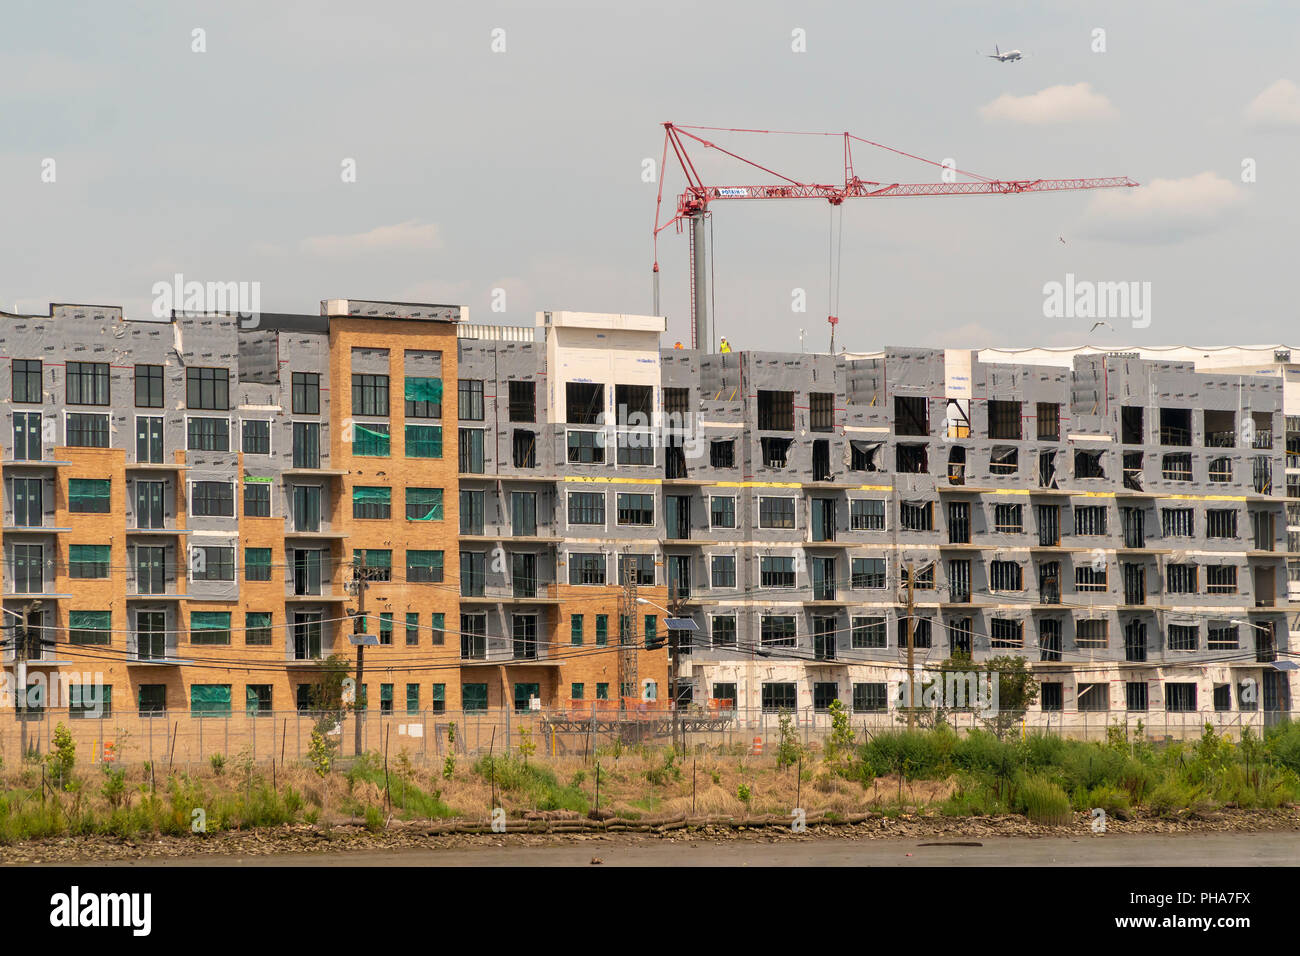 Construction of apartment buildings, in close proximity to the PATH commuter line, along the Passaic River in Harrison, NJ on Saturday, August 25, 2018.  (© Richard B. Levine) Stock Photo